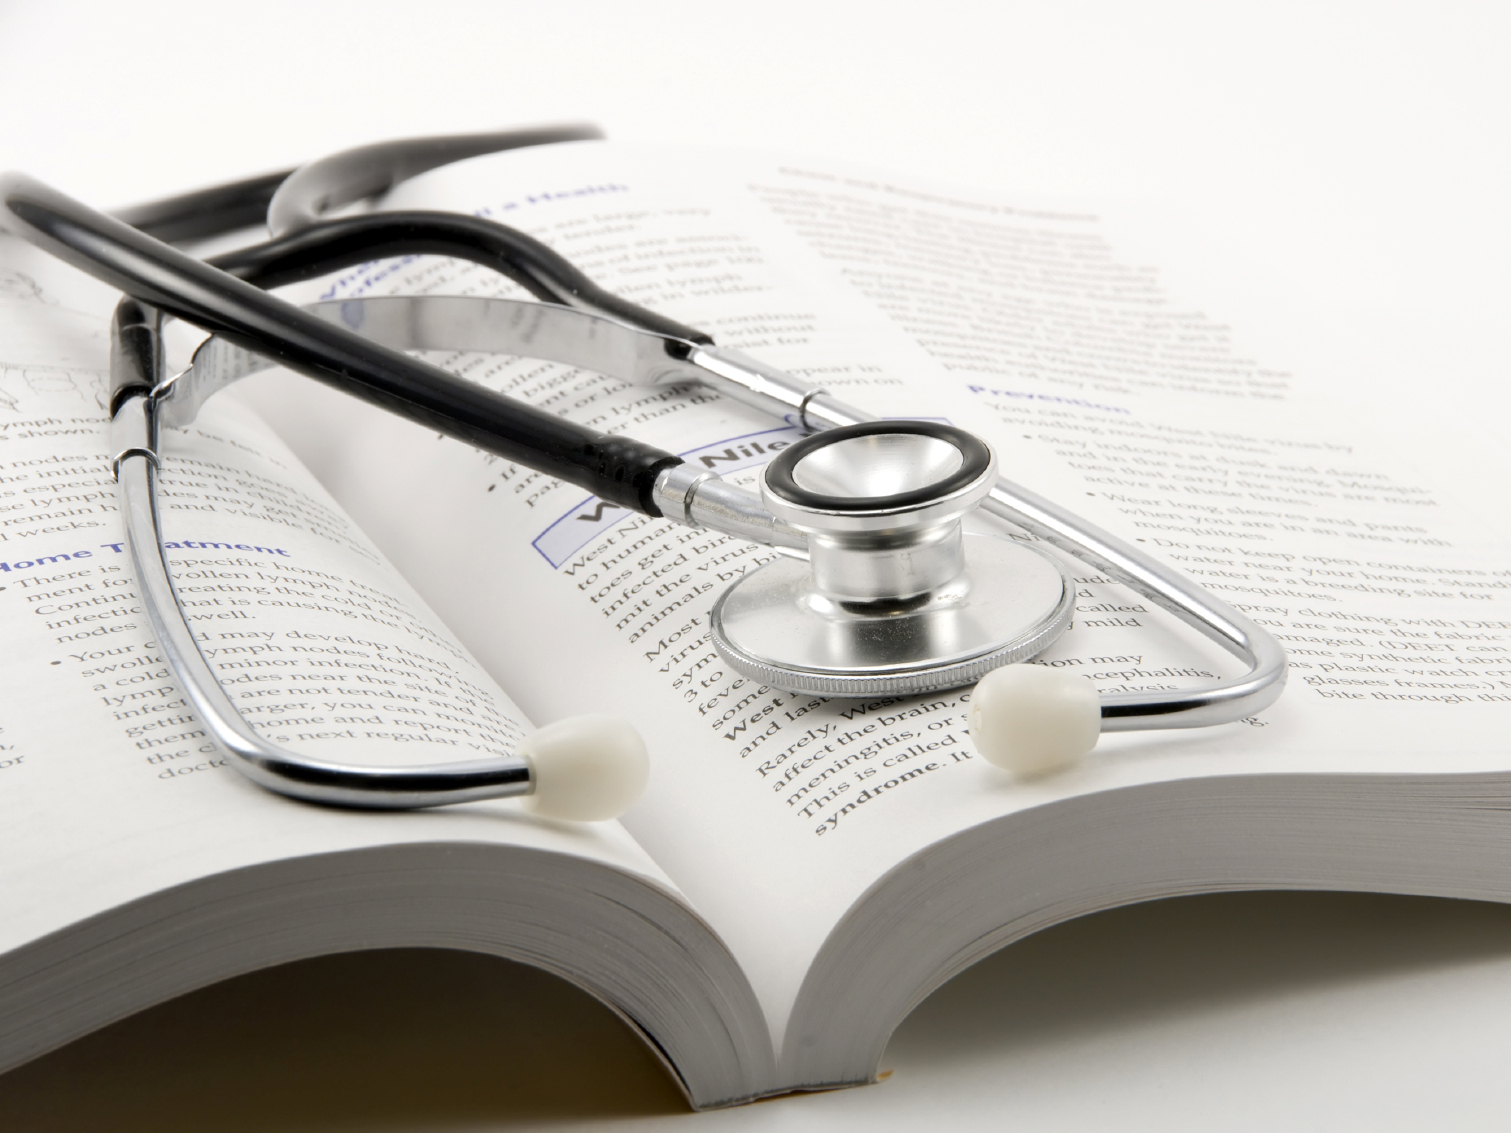 medical textbook and stethoscope